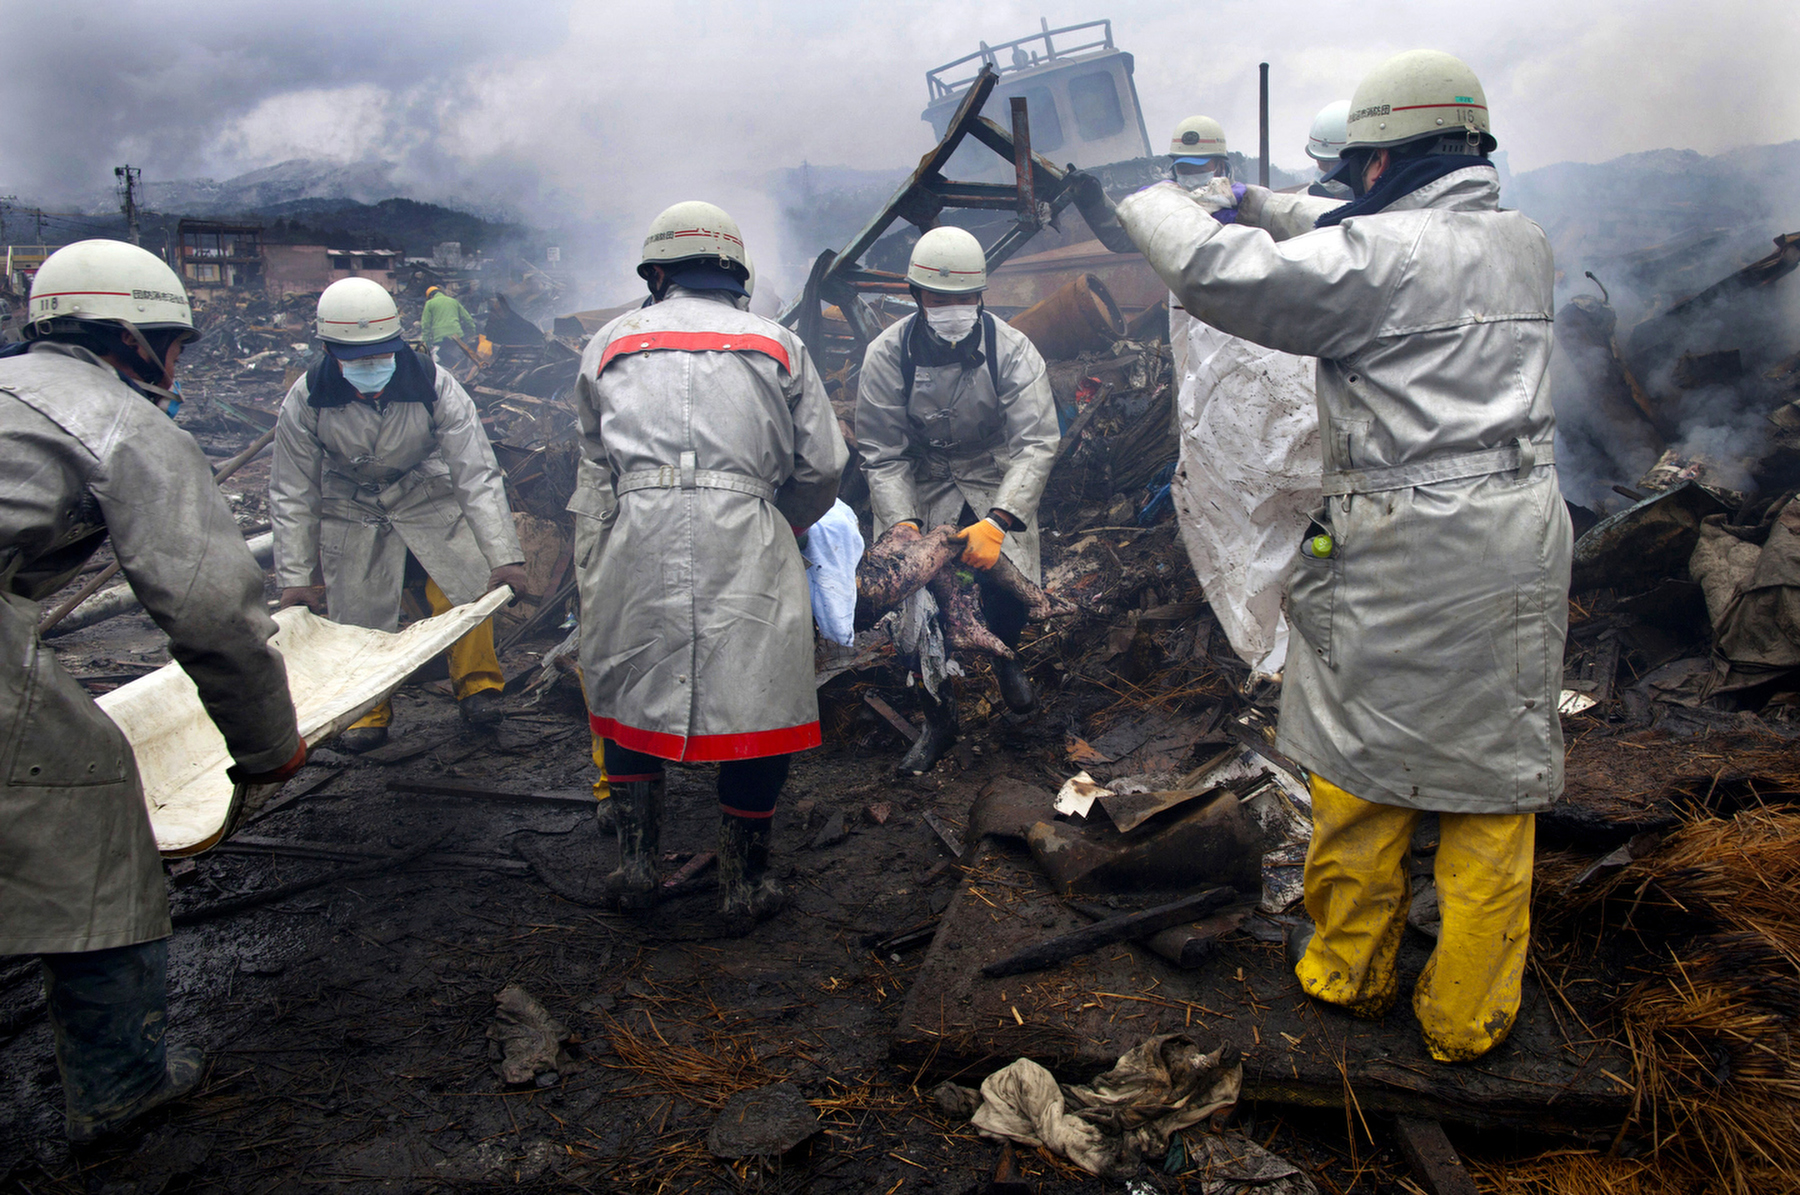 Rescue workers carry a charred body from the rubble of a village destroyed by the devastating earthquake, fires and tsunami March 16, 2011 in Kesennuma, Miyagi province, Japan.  One of the world\'s most developed country suffered it\'s worst natural disaster as a strong 8.9 earthquake followed by a Tsunami hit the north-central coast of Japan, killing thousands, followed by a potential nuclear meltdown after the country\'s major nuclear plant was seriously damaged from the quake. 